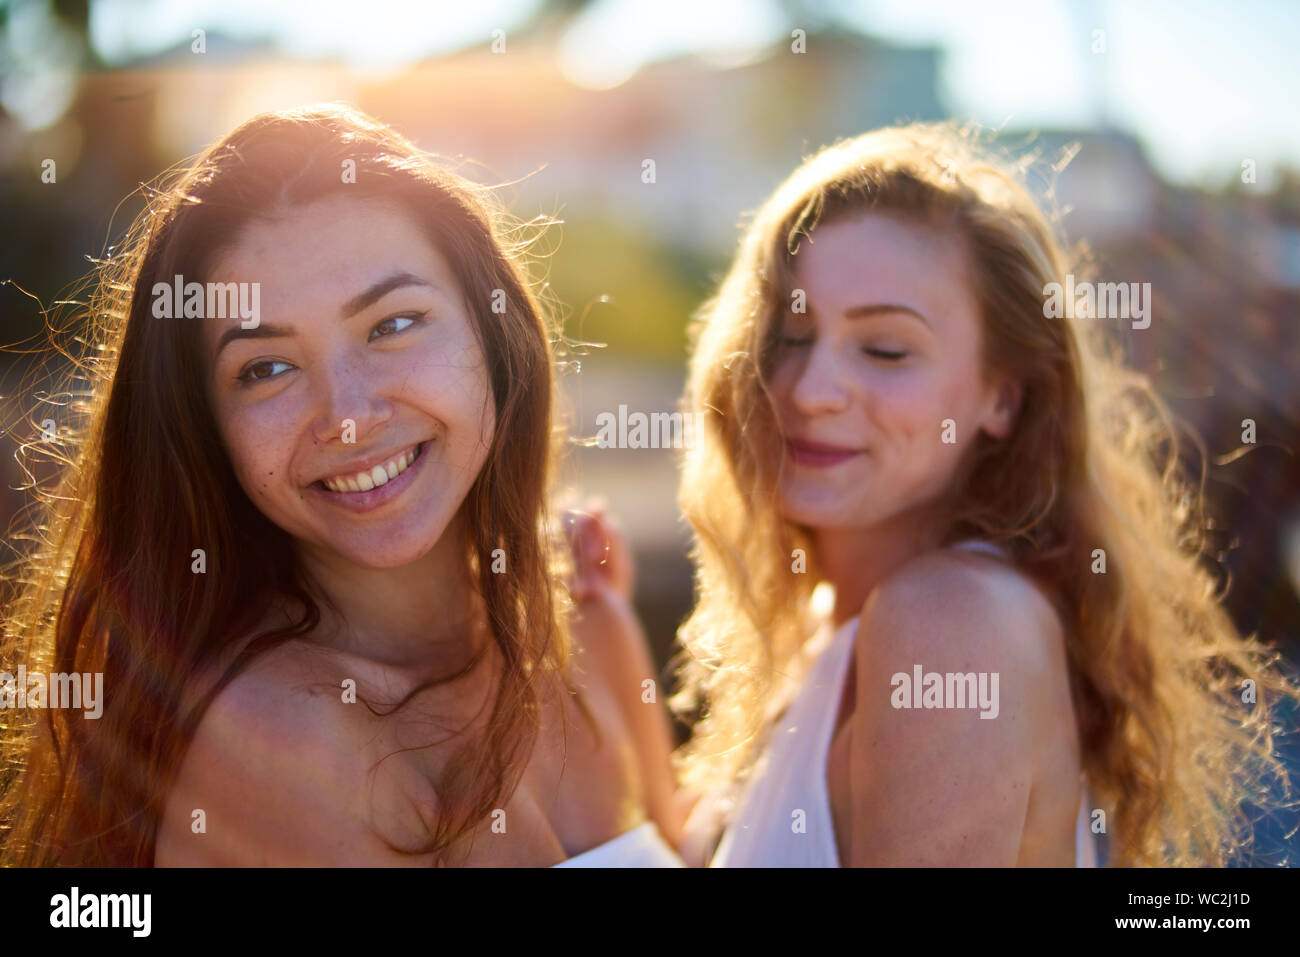 Young Smiling Woman with Long Hair Banque D'Images